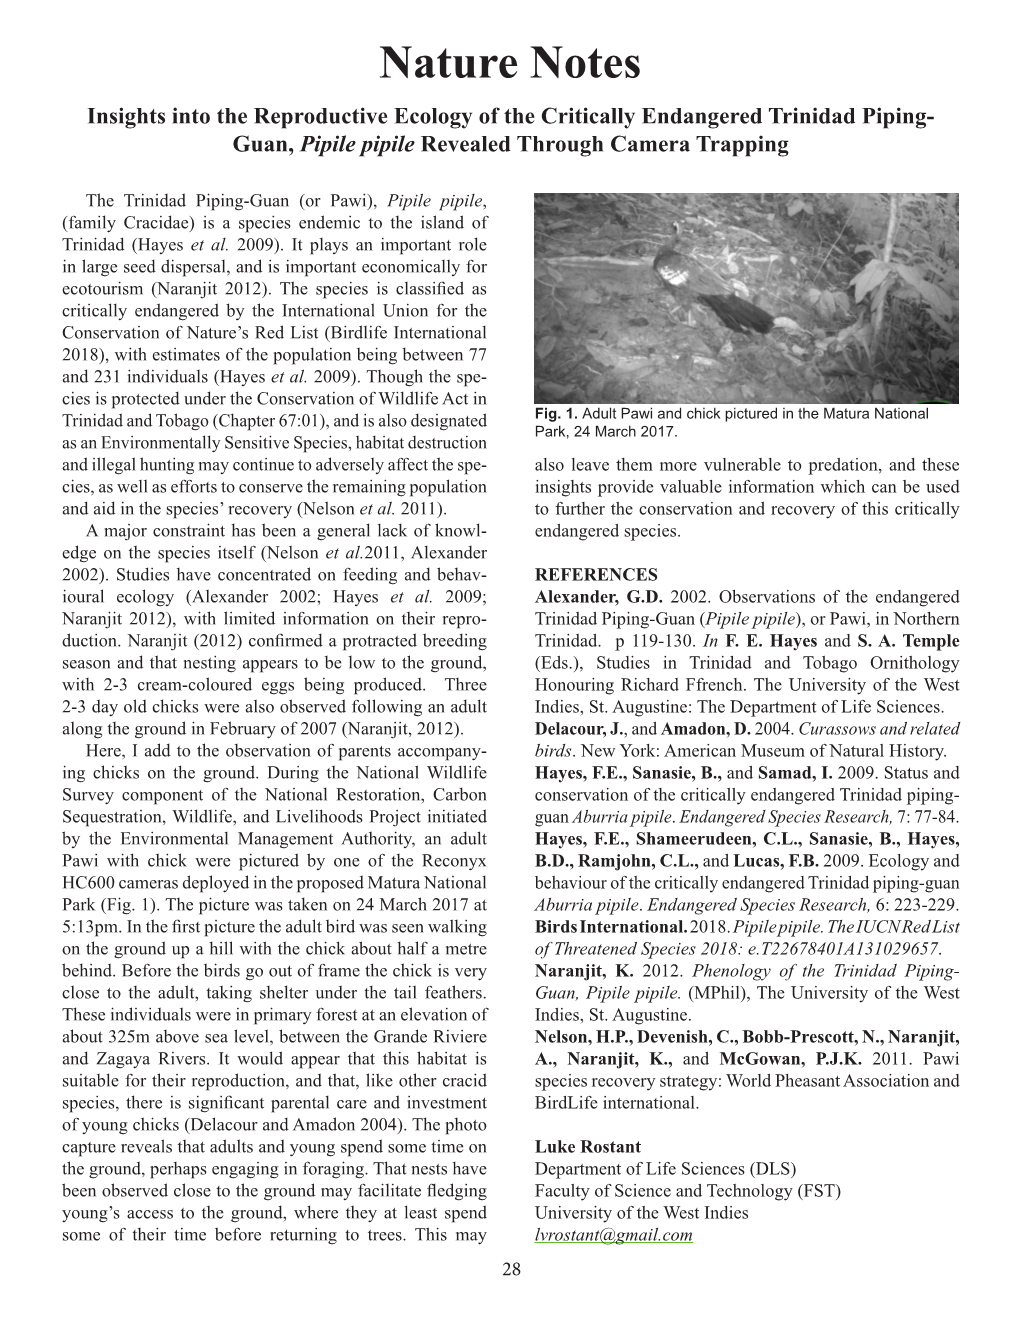 Nature Notes Insights Into the Reproductive Ecology of the Critically Endangered Trinidad Piping- Guan, Pipile Pipile Revealed Through Camera Trapping